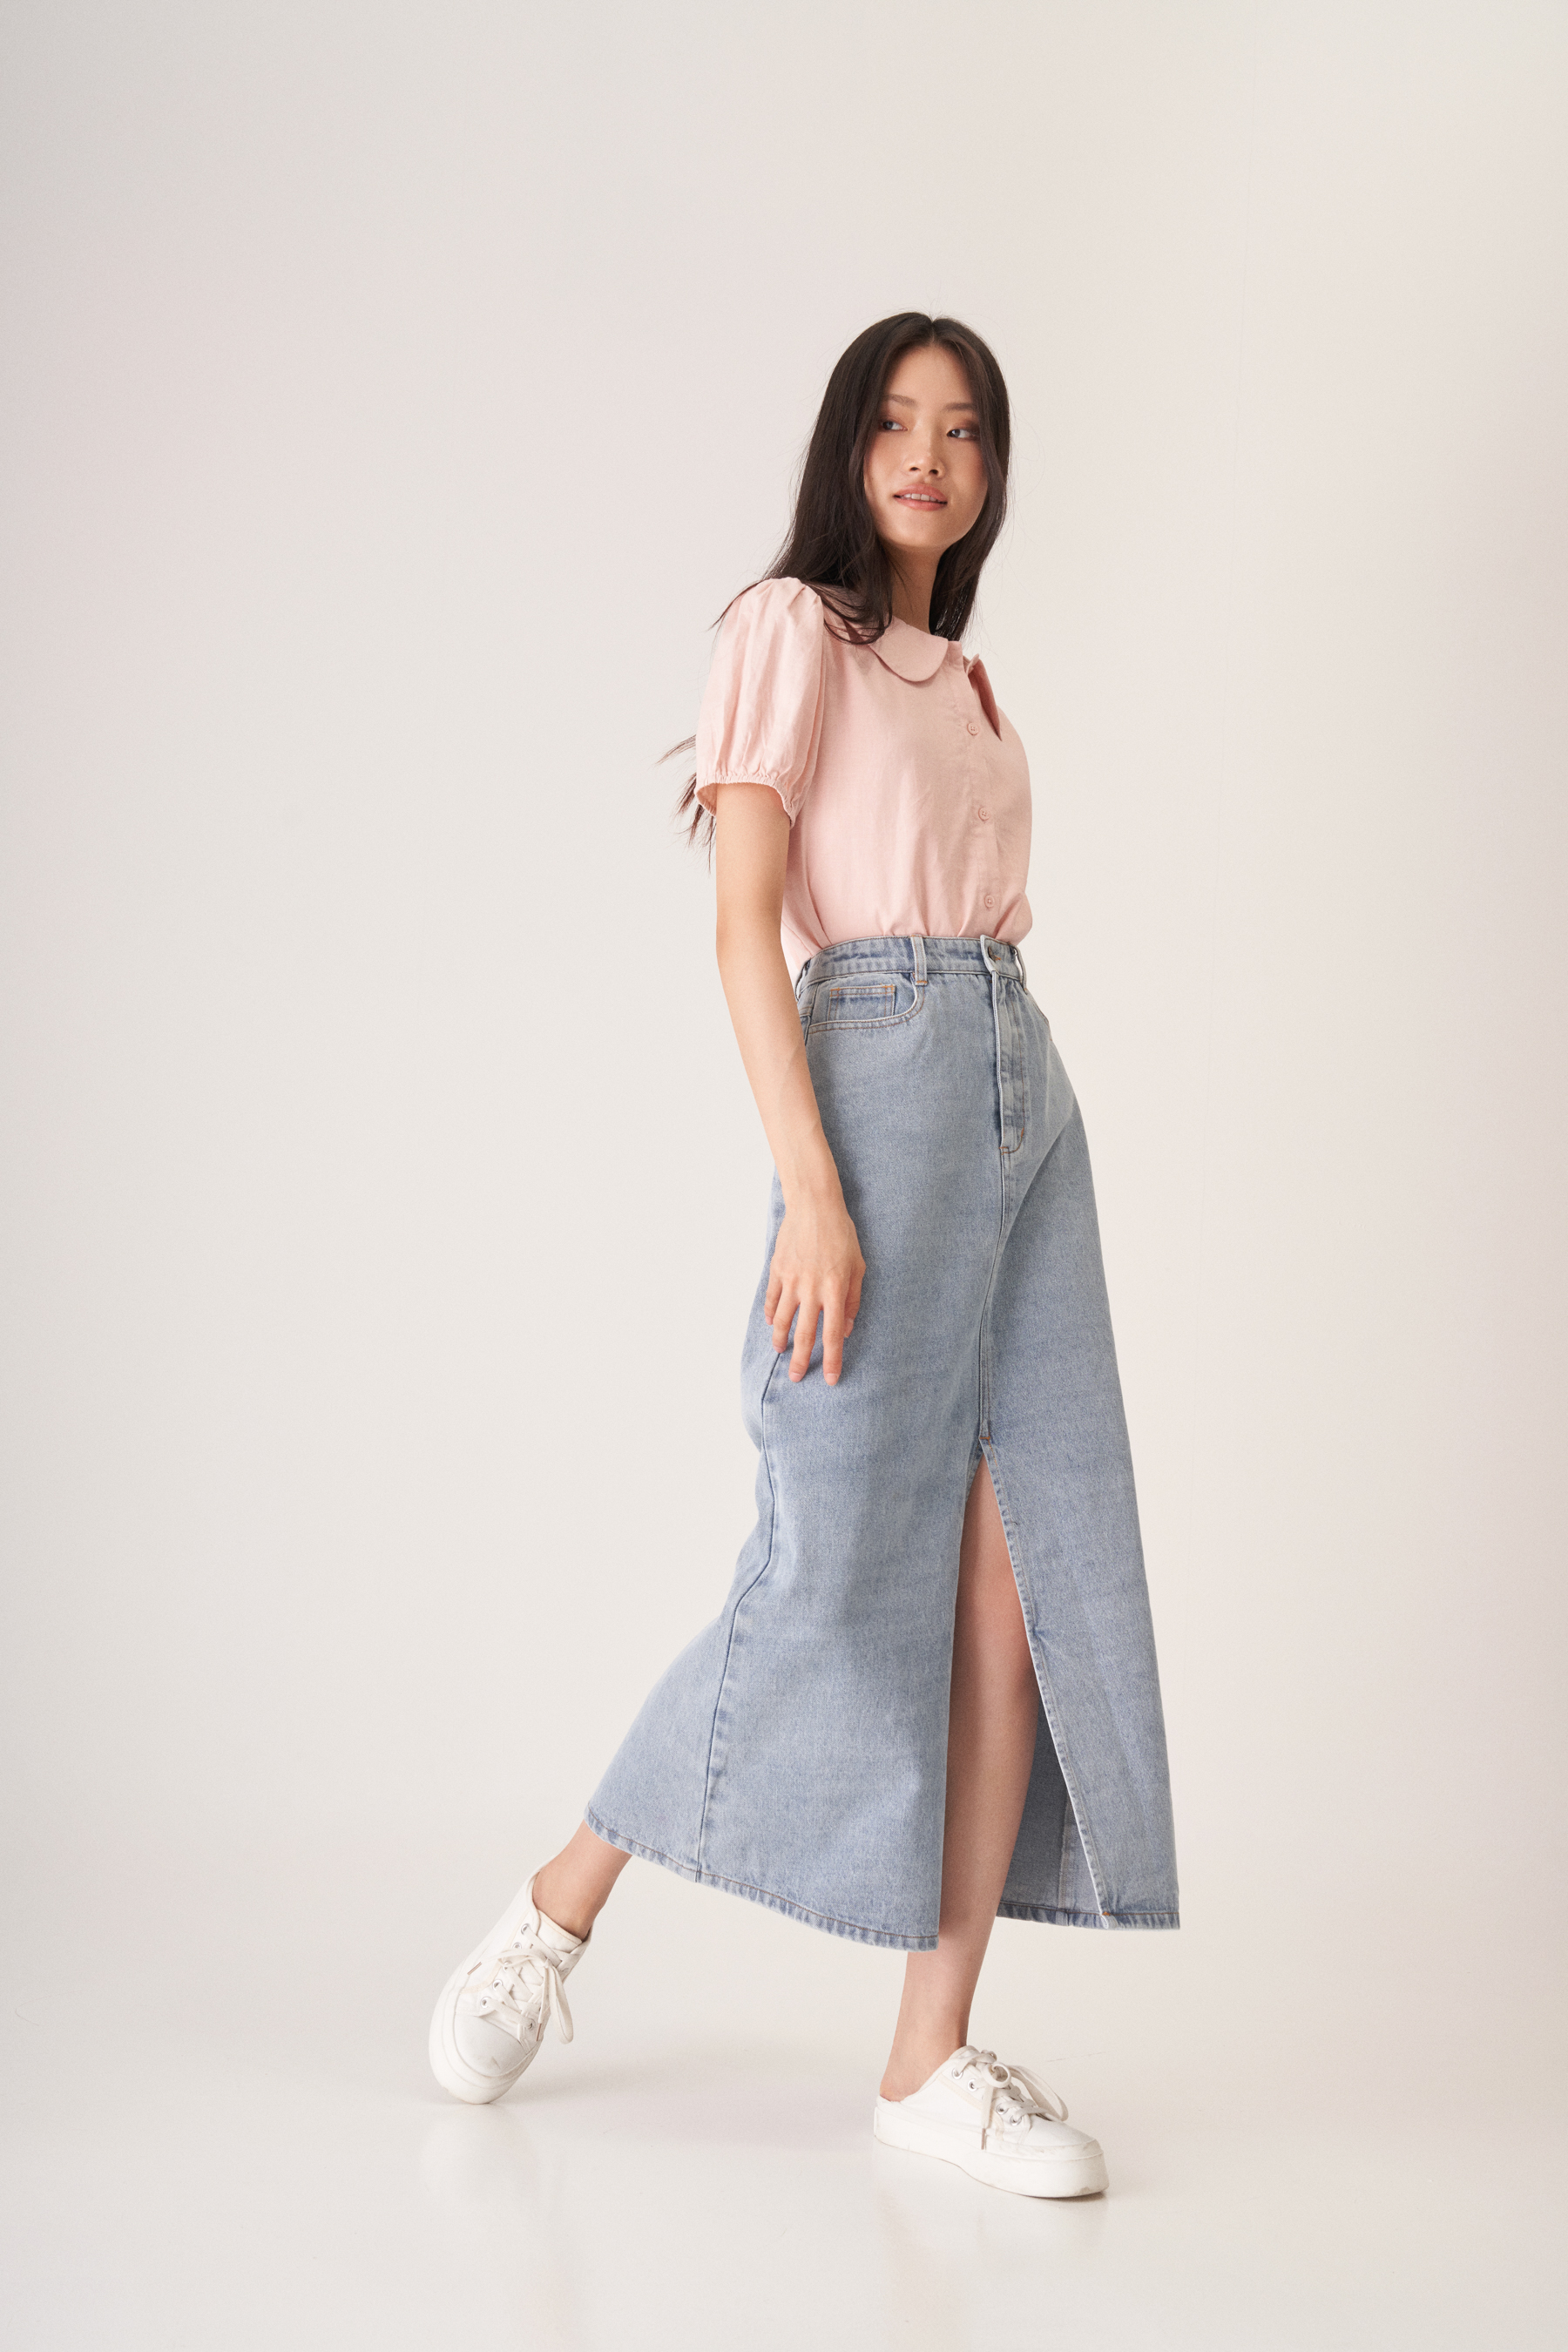 https://dum76bmz7do3s.cloudfront.net/sites/files/theclosetlover/images/products/202305/wendy_linen_collared_top_in_pink2.jpg